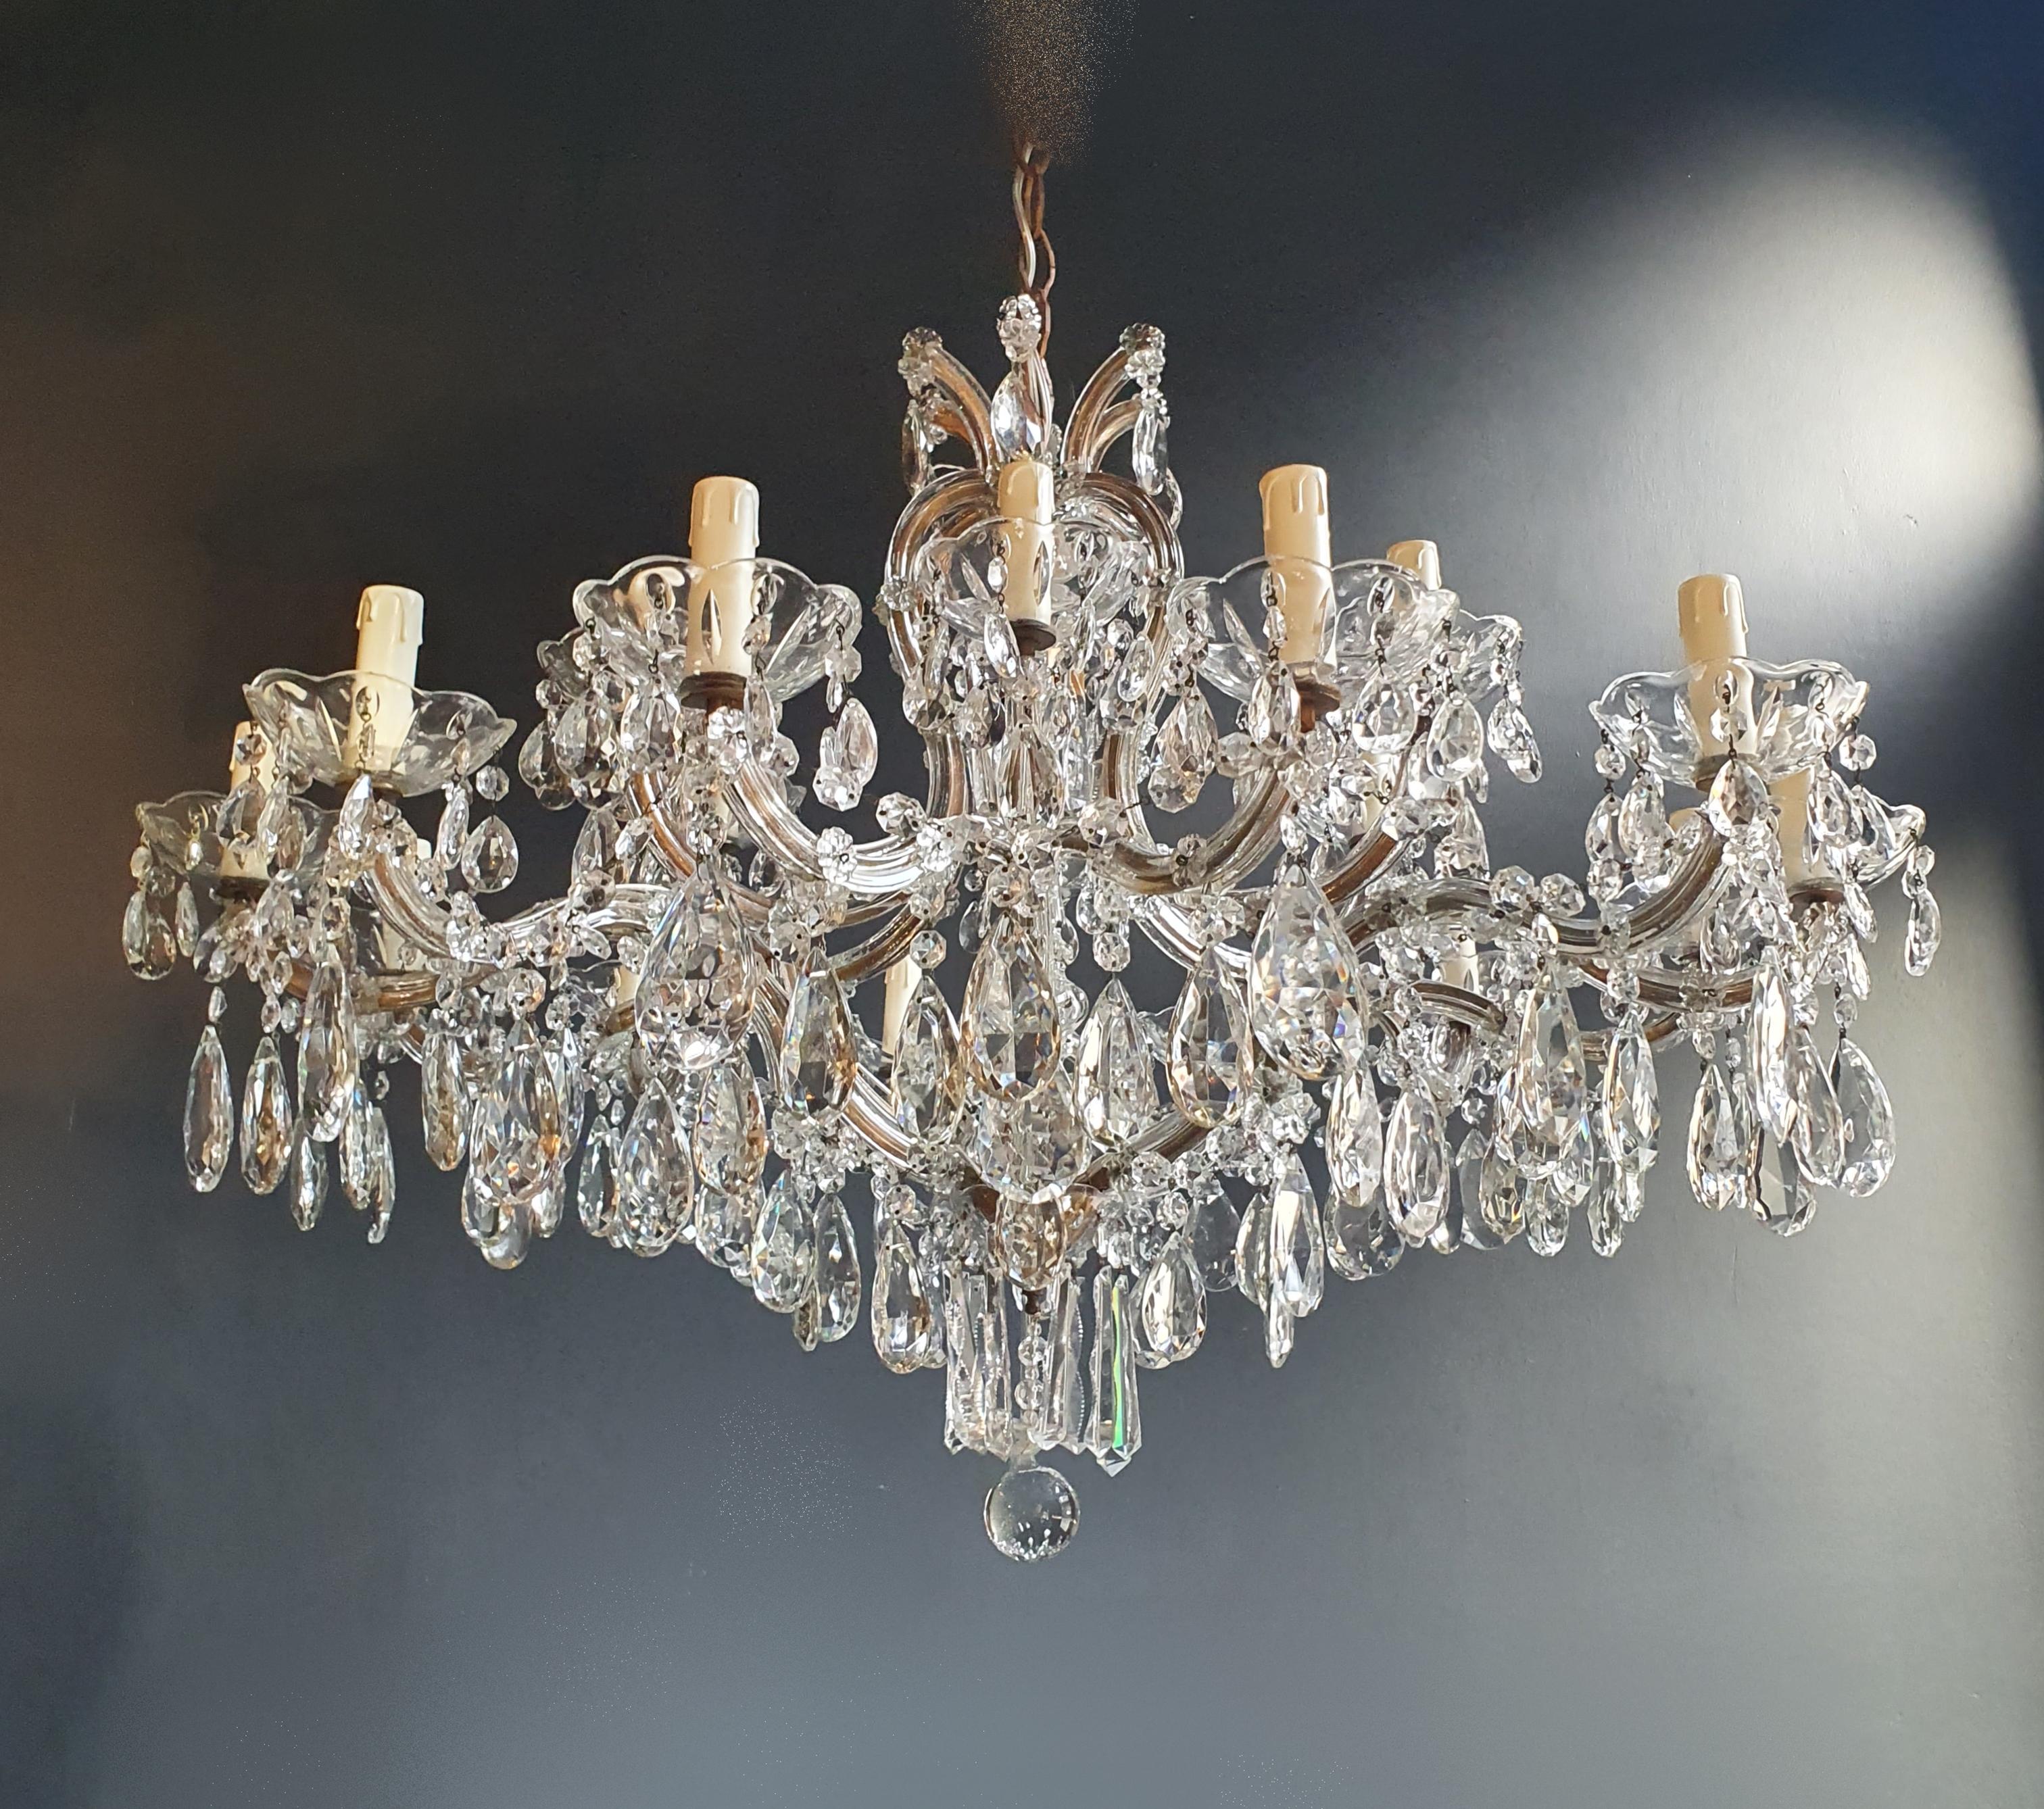 Hand-Knotted Maria Theresa Crystal Chandelier Antique Ceiling Lamp Luster Art Nouveau